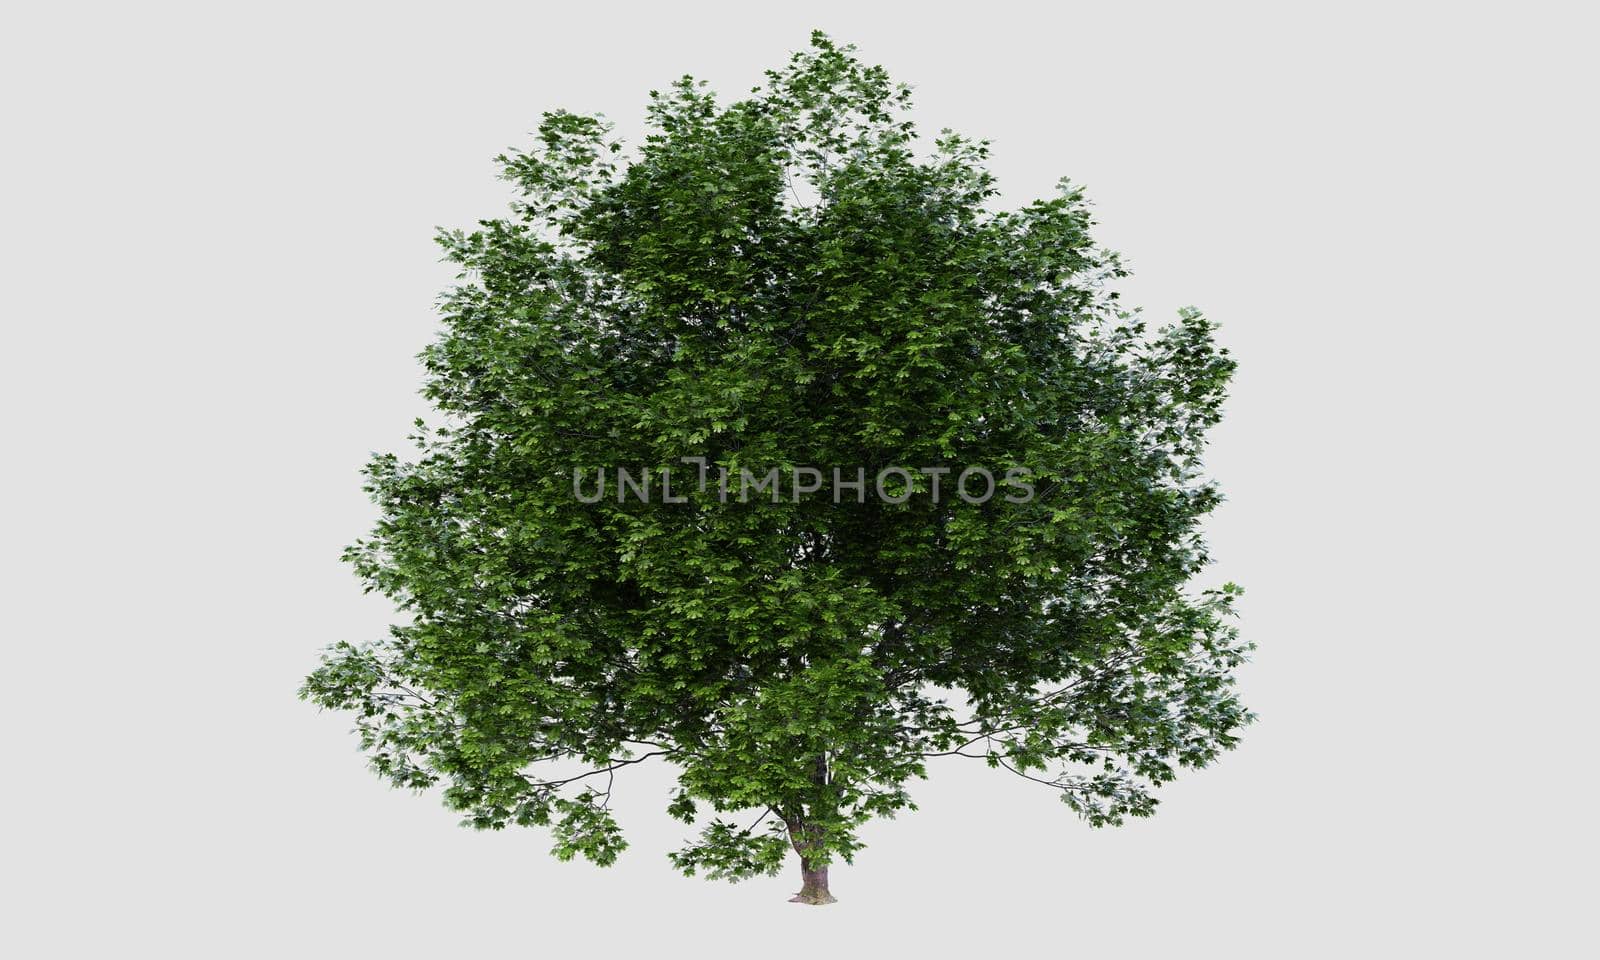 Big Acer marcophillum tree on isolated white background. Nature and object concept. 3D illustration rendering by MiniStocker